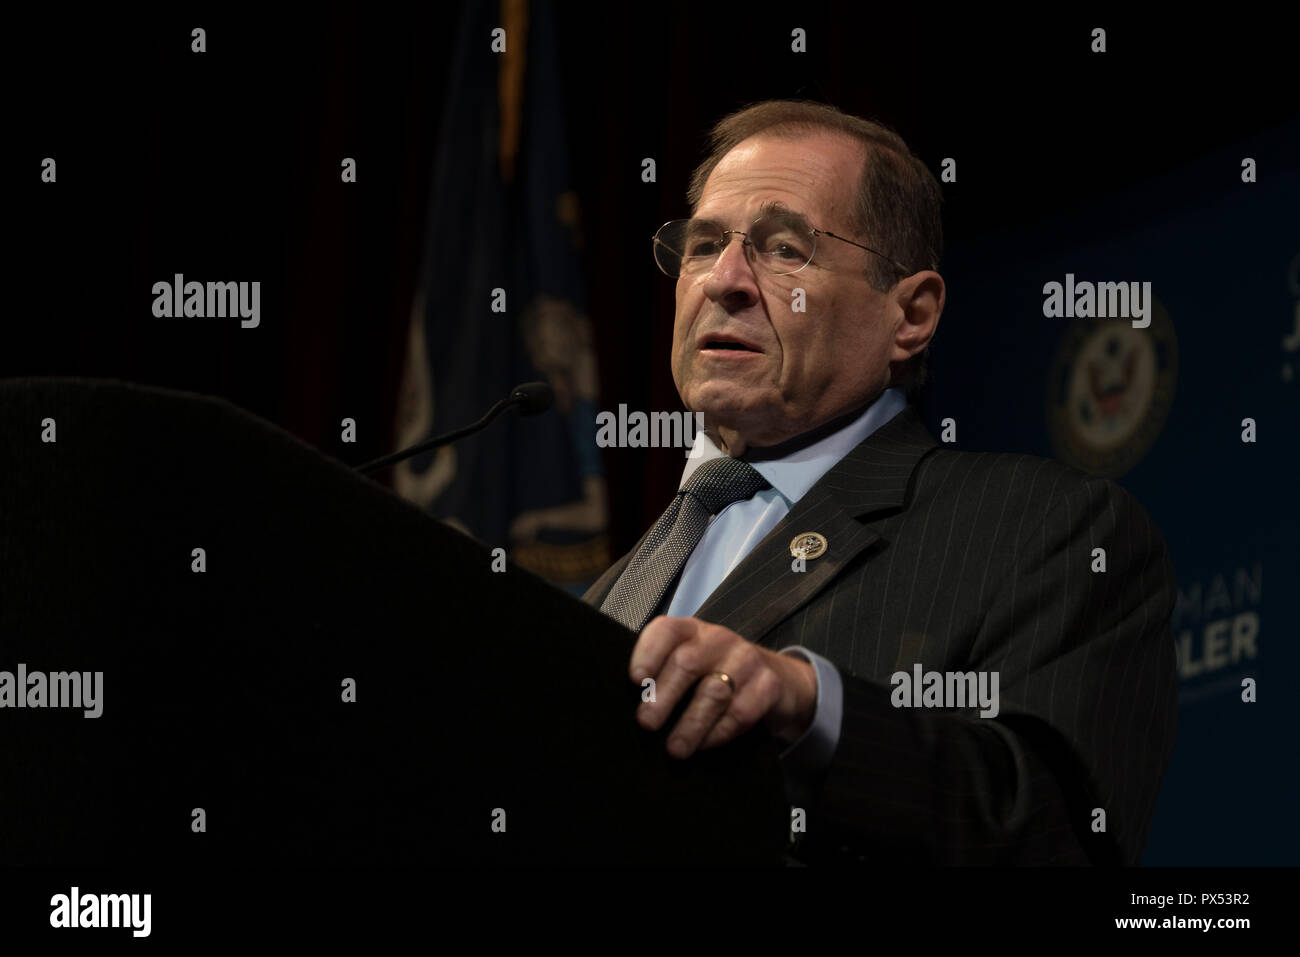 Congressman Jerrold Nadler (D-NY), who represents the 10th Congressional District, spoke at a Town Hall meeting on Oct. 9, 2018. Stock Photo